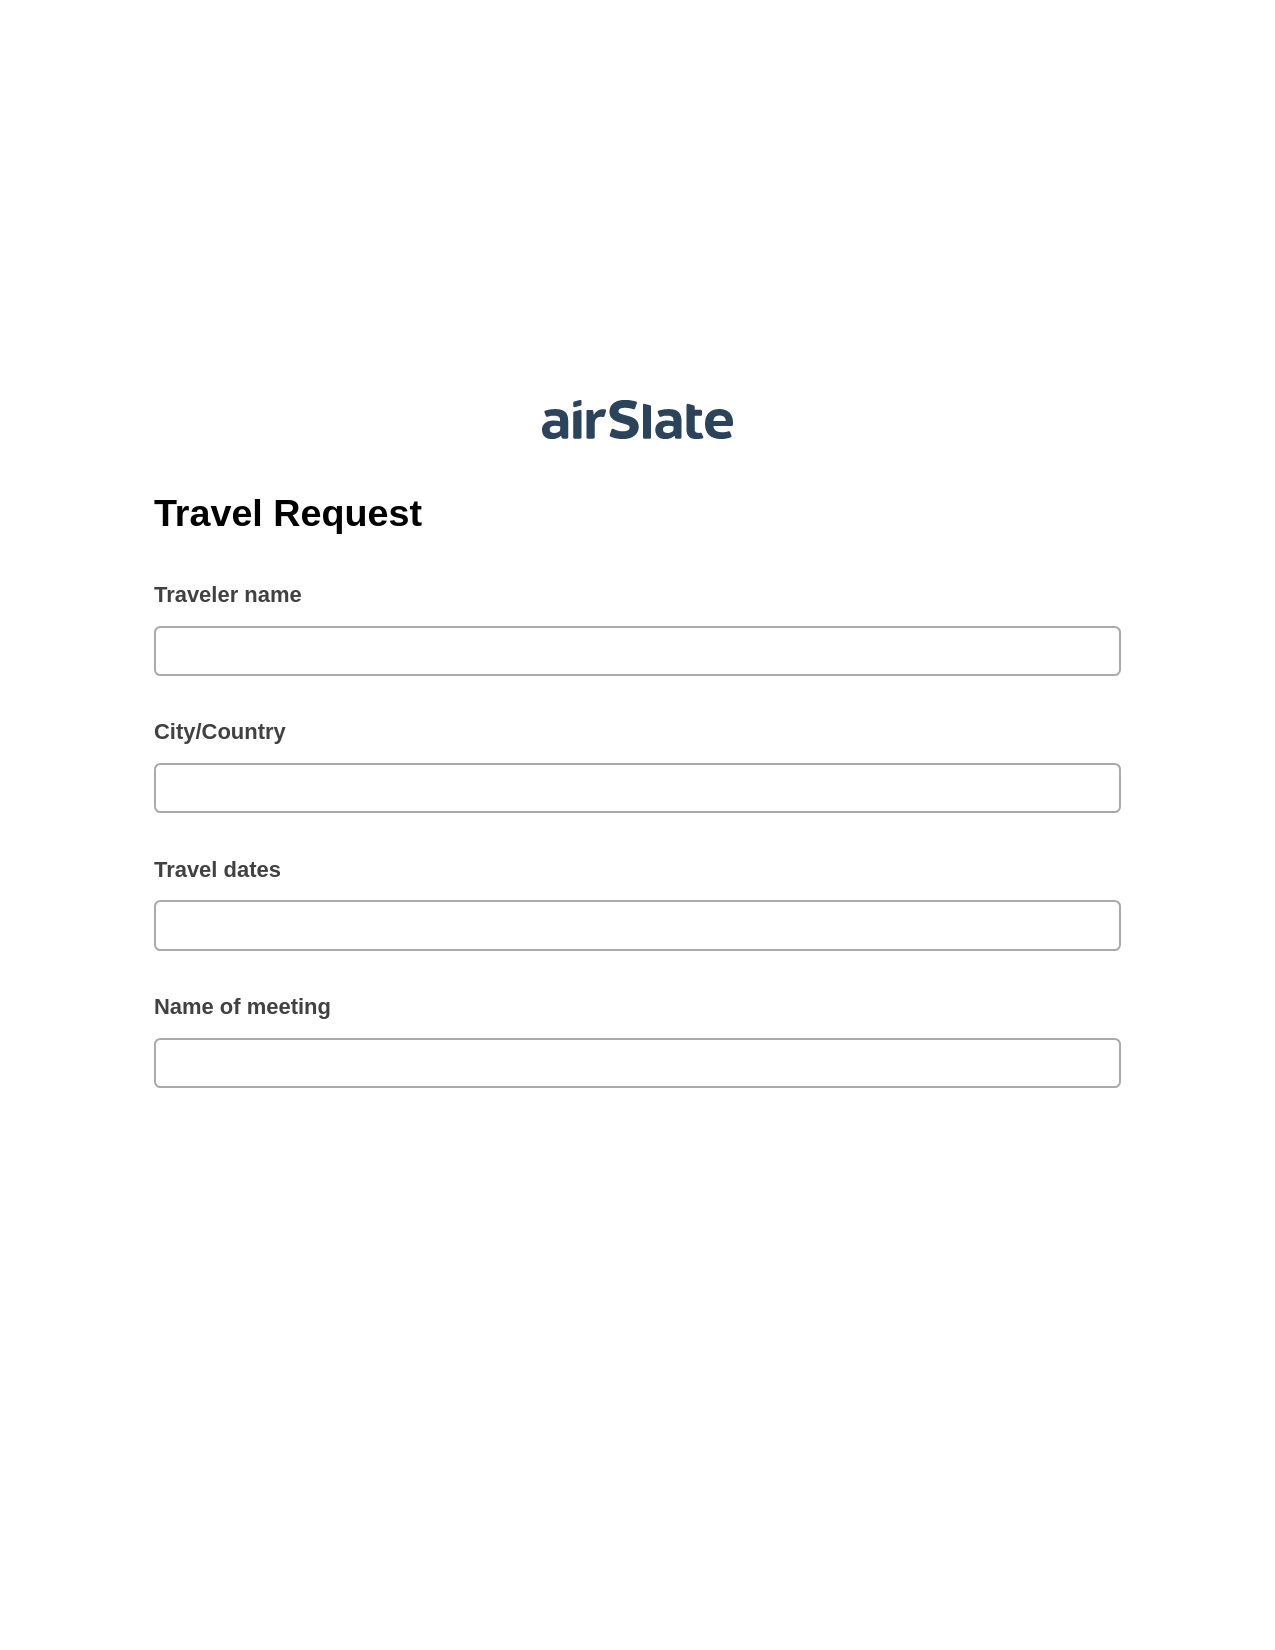 Multirole Travel Request Pre-fill Slate from MS Dynamics 365 Records Bot, Lock the slate bot, Export to NetSuite Record Bot